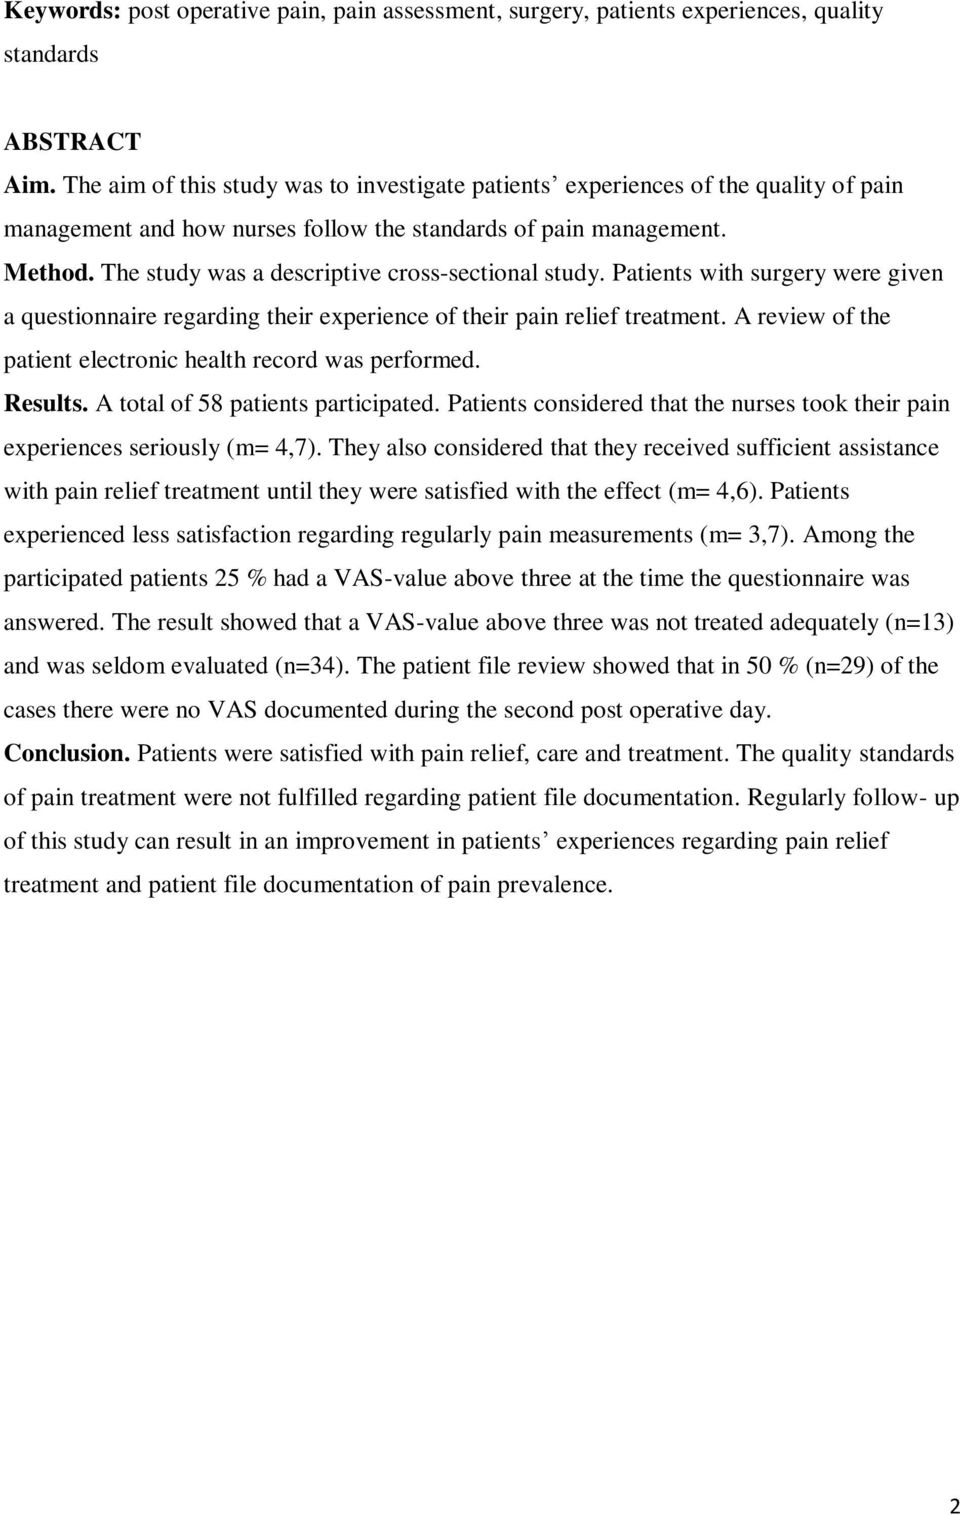 The study was a descriptive cross-sectional study. Patients with surgery were given a questionnaire regarding their experience of their pain relief treatment.